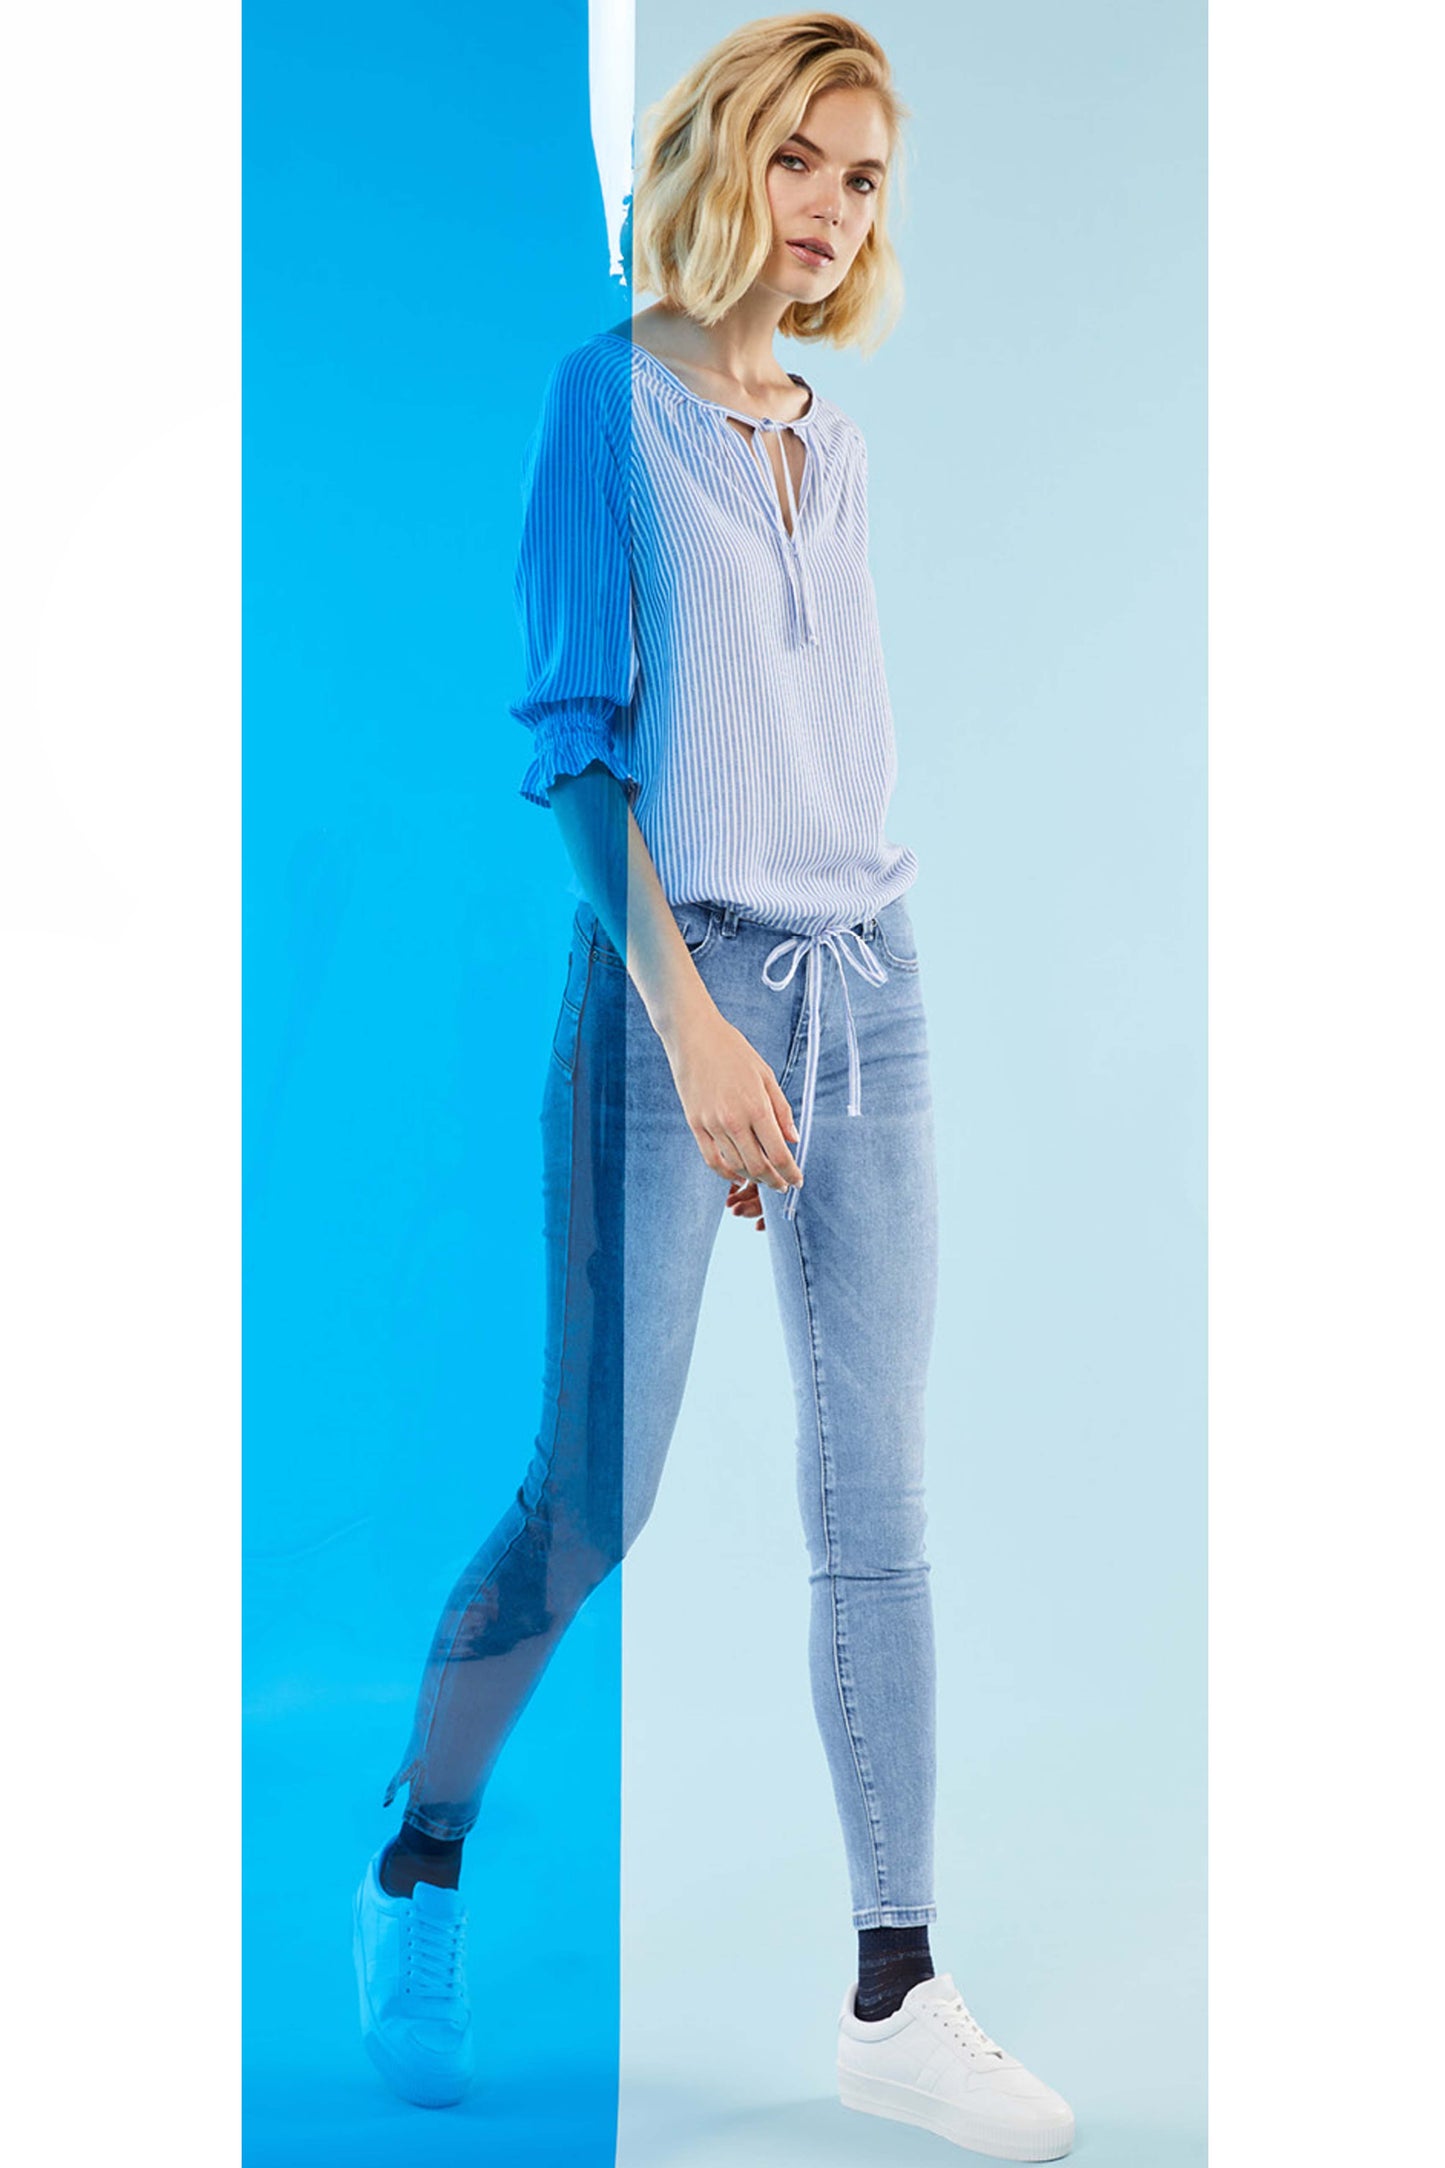 SiSi Look Me Jeggings - High rise soft cotton jean leggings (jeggings) in light denim blue with button and fly zip closures, front and back pockets, belt loops and side slits on the cuffs. Worn with a stripe cotton blouse and white sneakers.